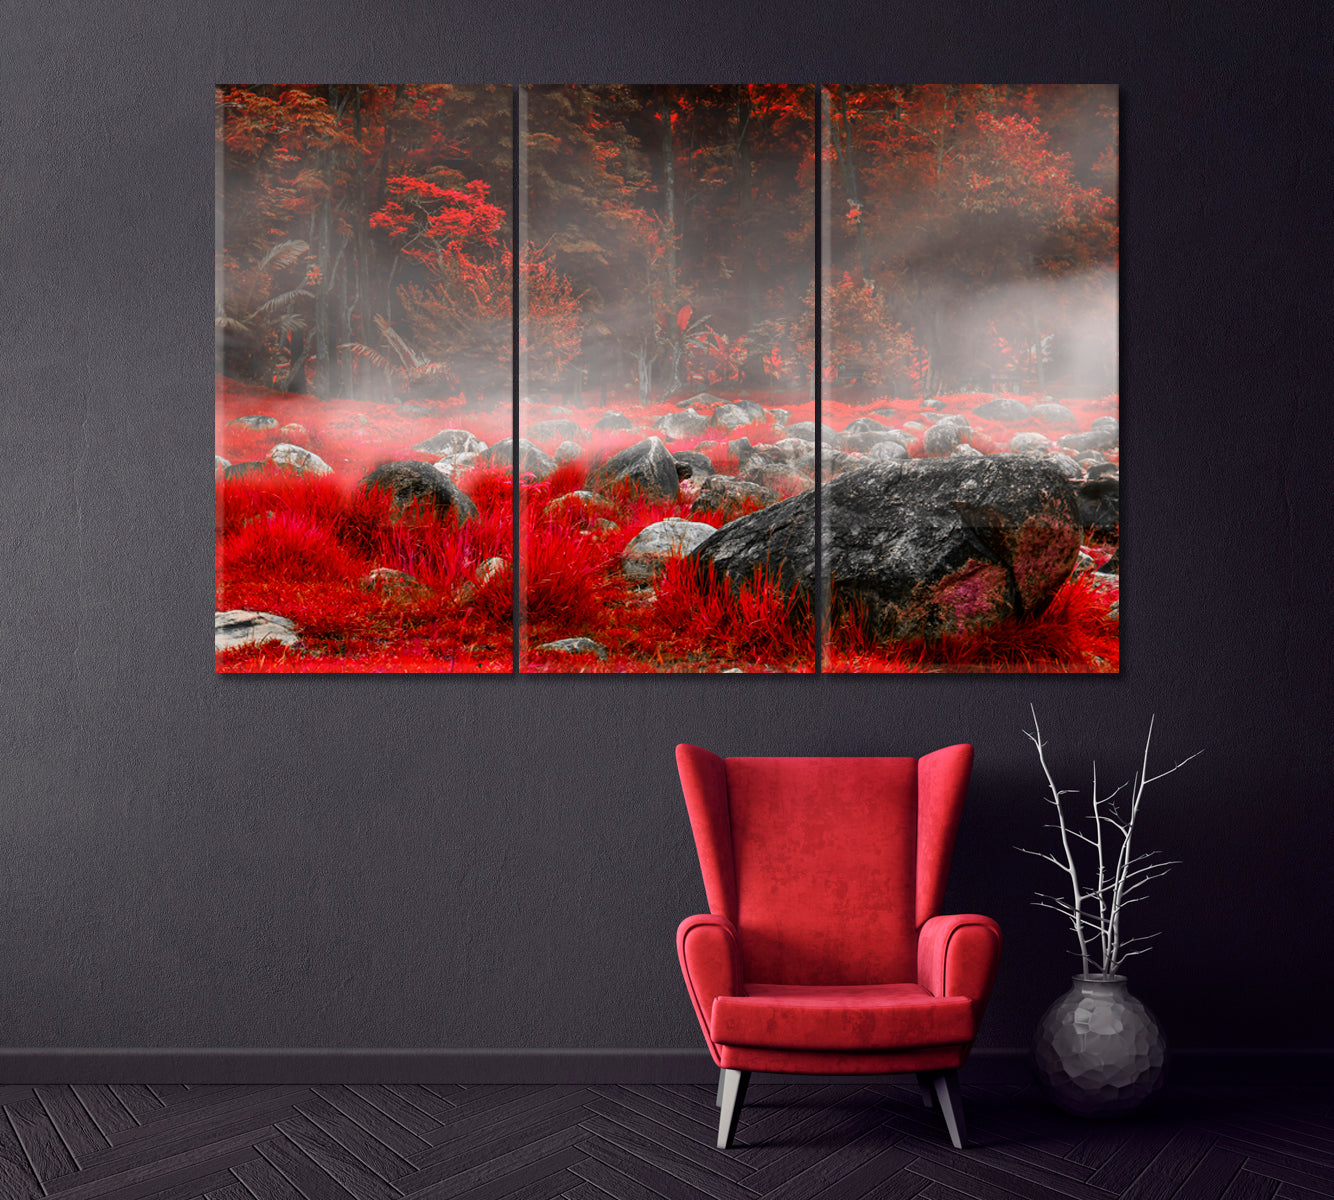 Red Beach Panjin Canvas Print ArtLexy 3 Panels 36"x24" inches 